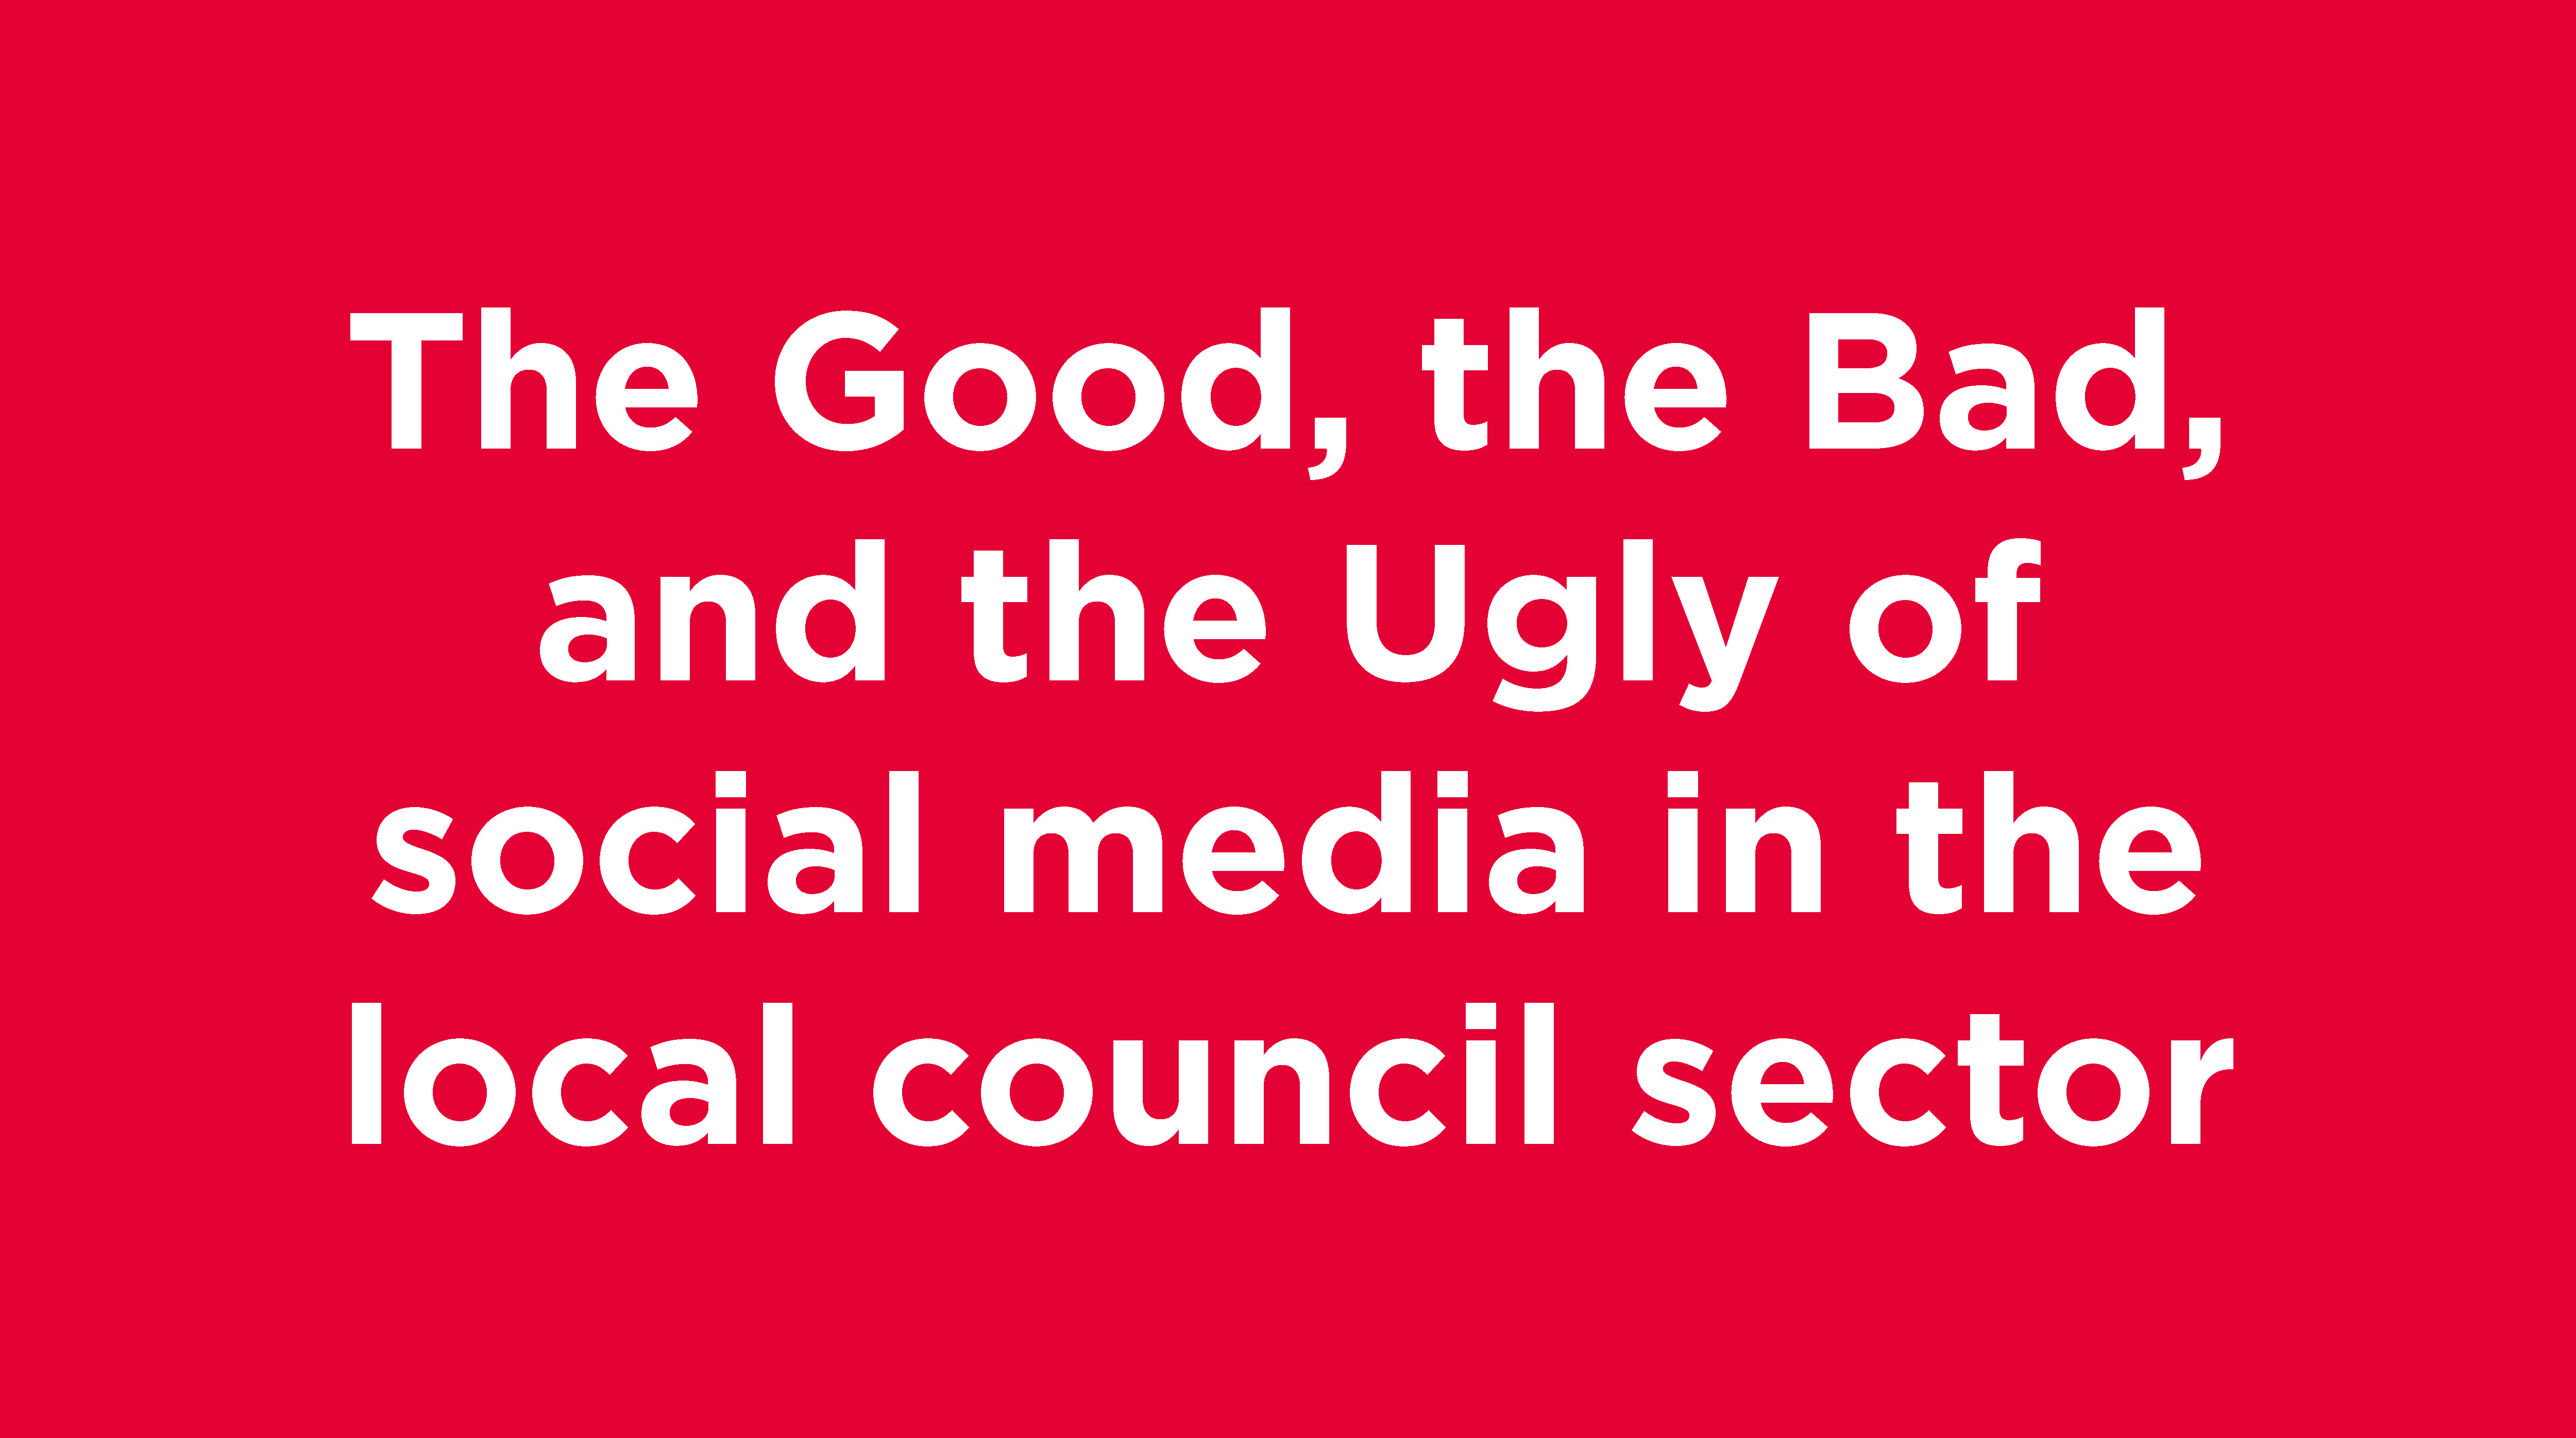 The-Good-the-Bad-and-the-Ugly-of-social-media-in-the-local-council-sector